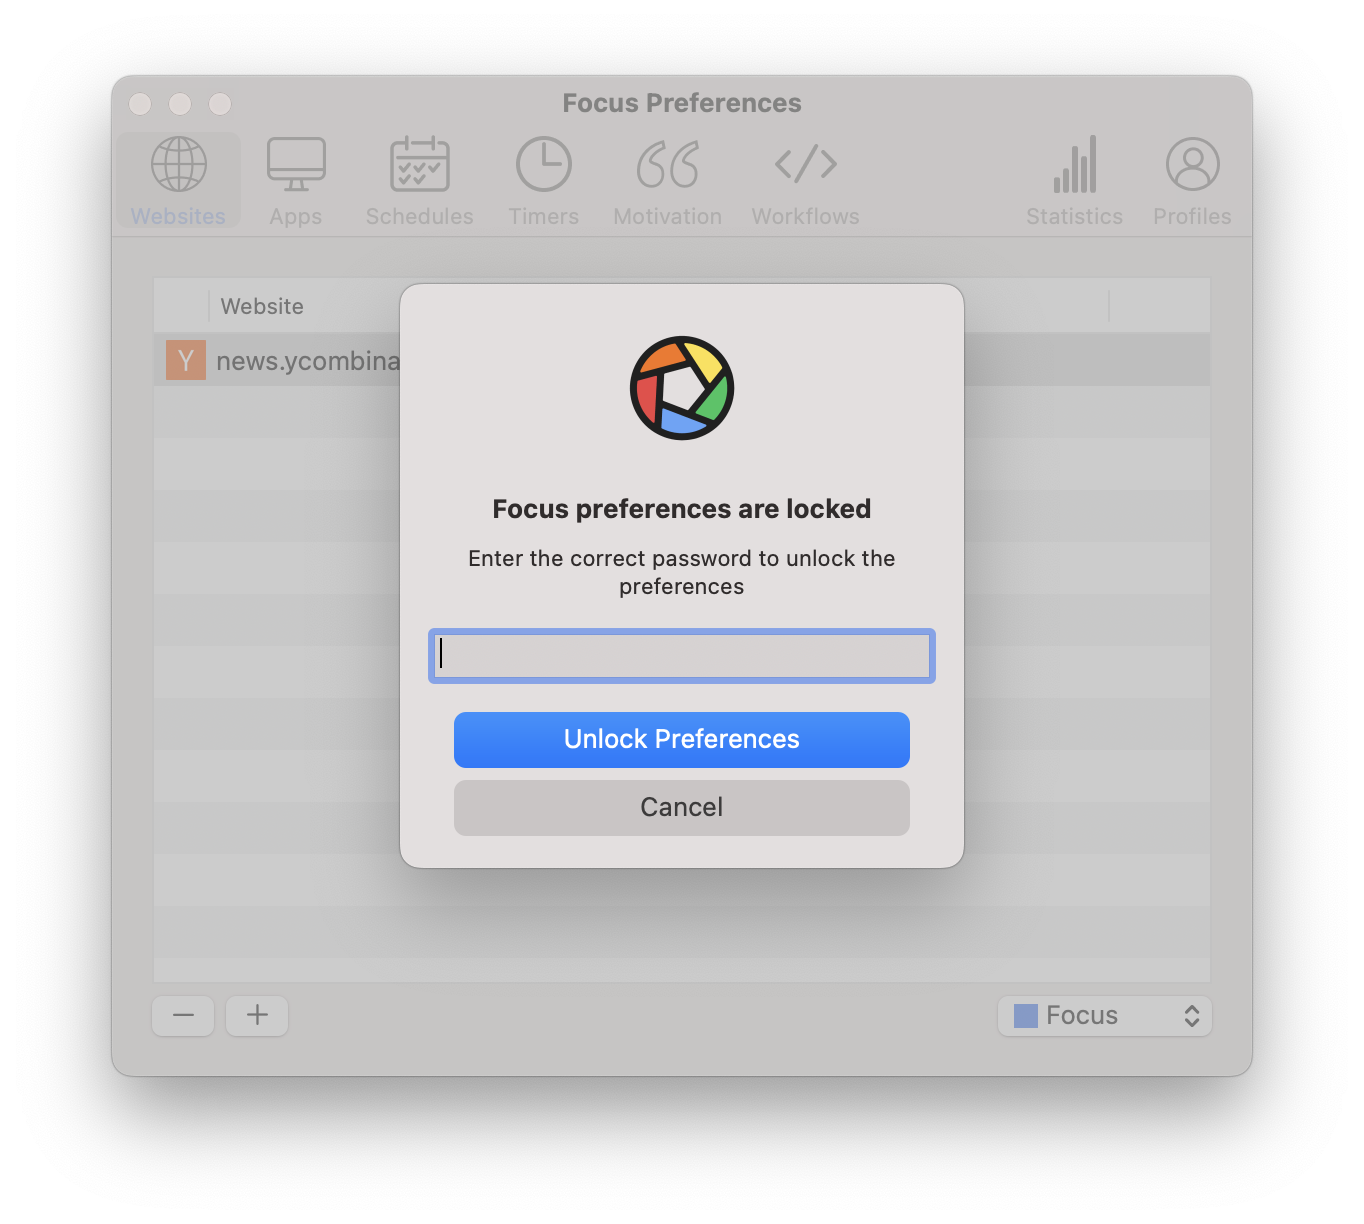 Focus lets you setup profiles that cannot be changed without a password.